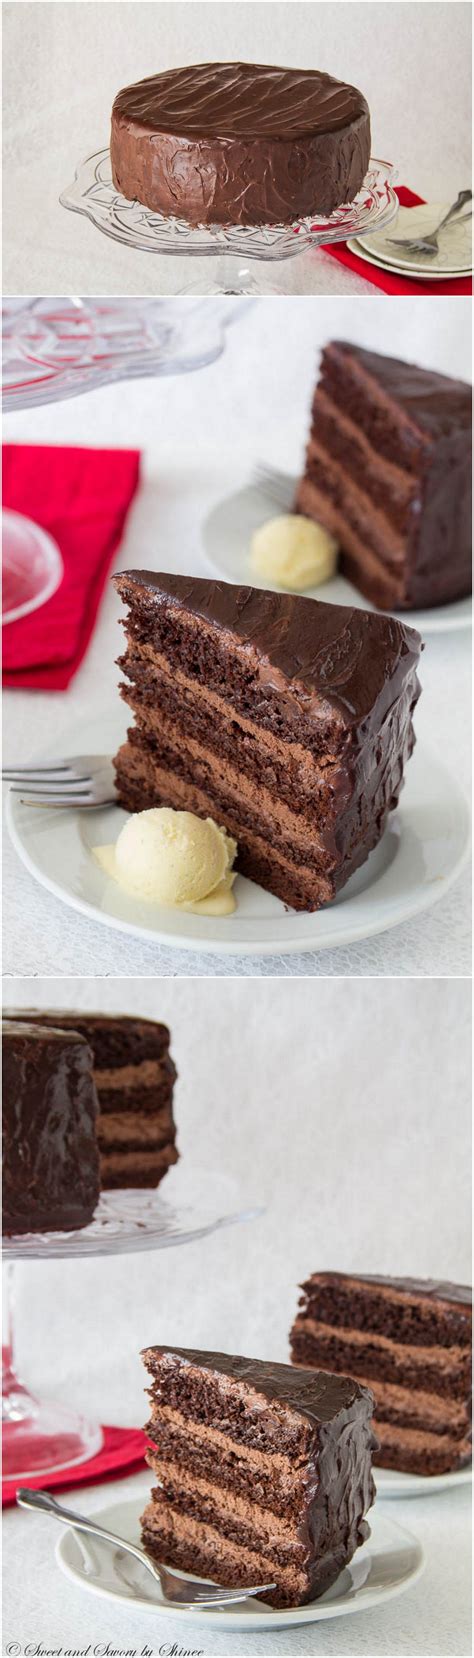 Looking for an easy cake recipe? Supreme Chocolate Cake with Chocolate Mousse Filling ...